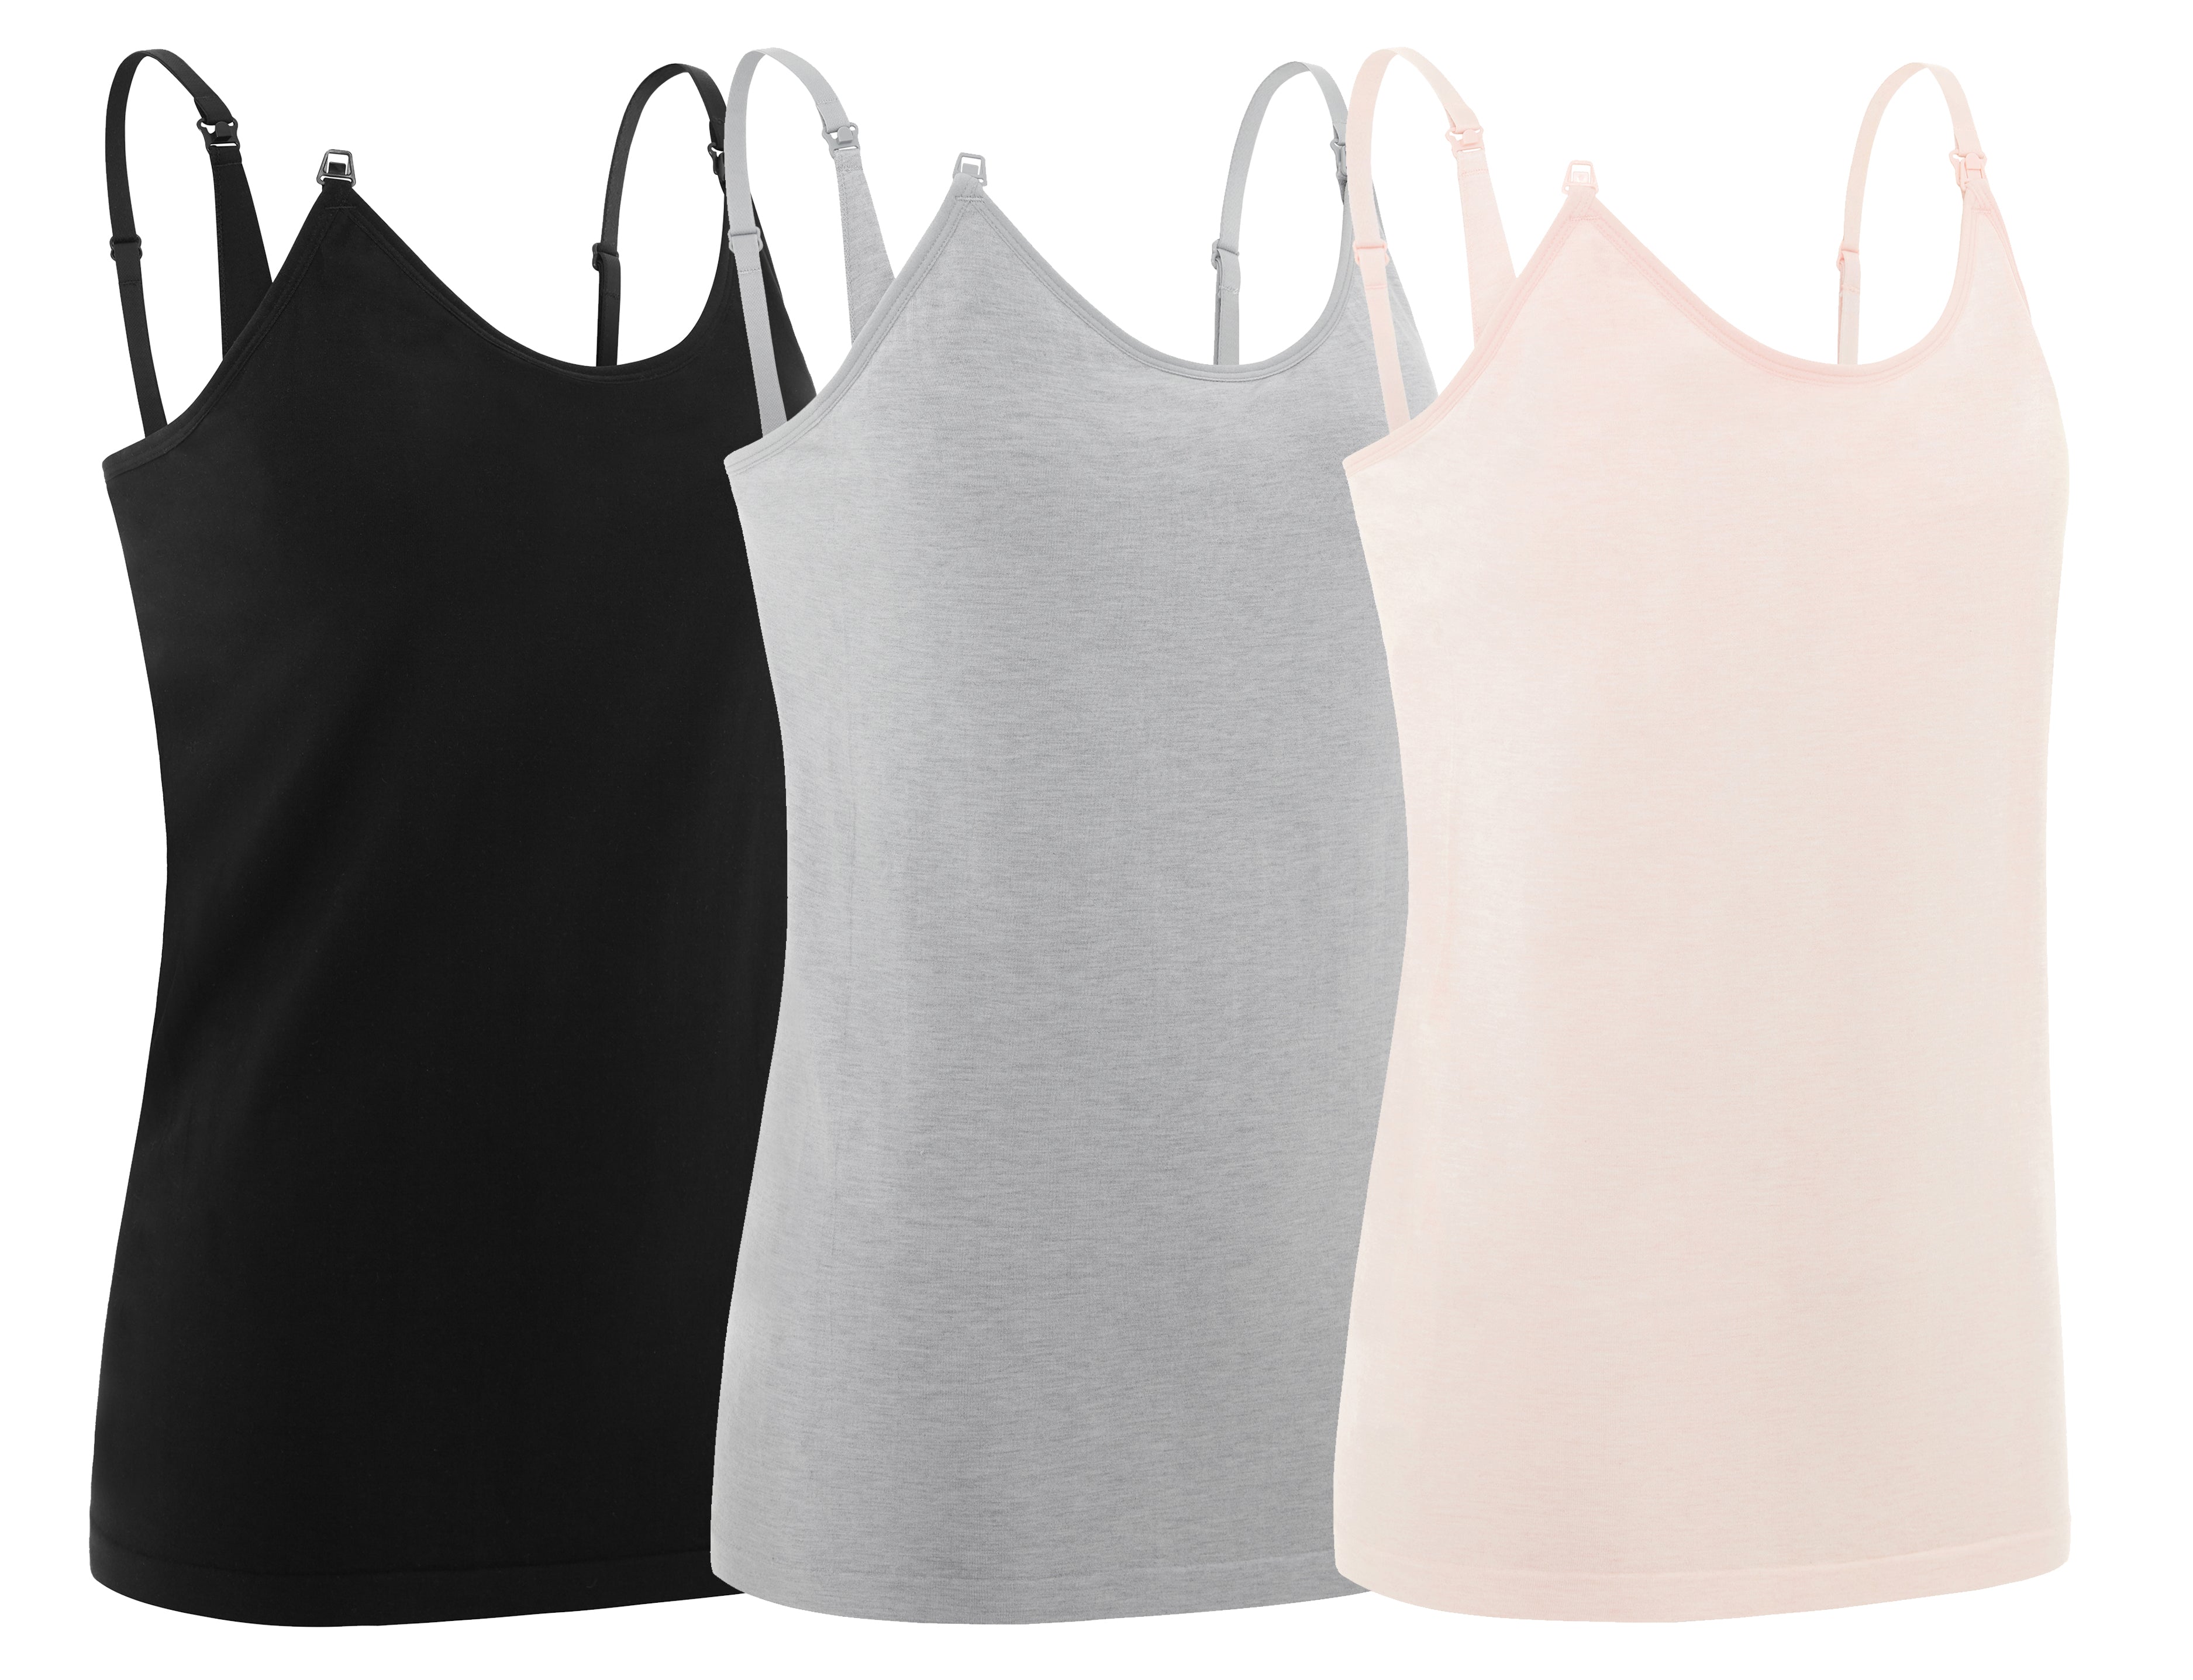 Control Under |Maternity Camisole (Black/Grey/Pink) 3 Pack